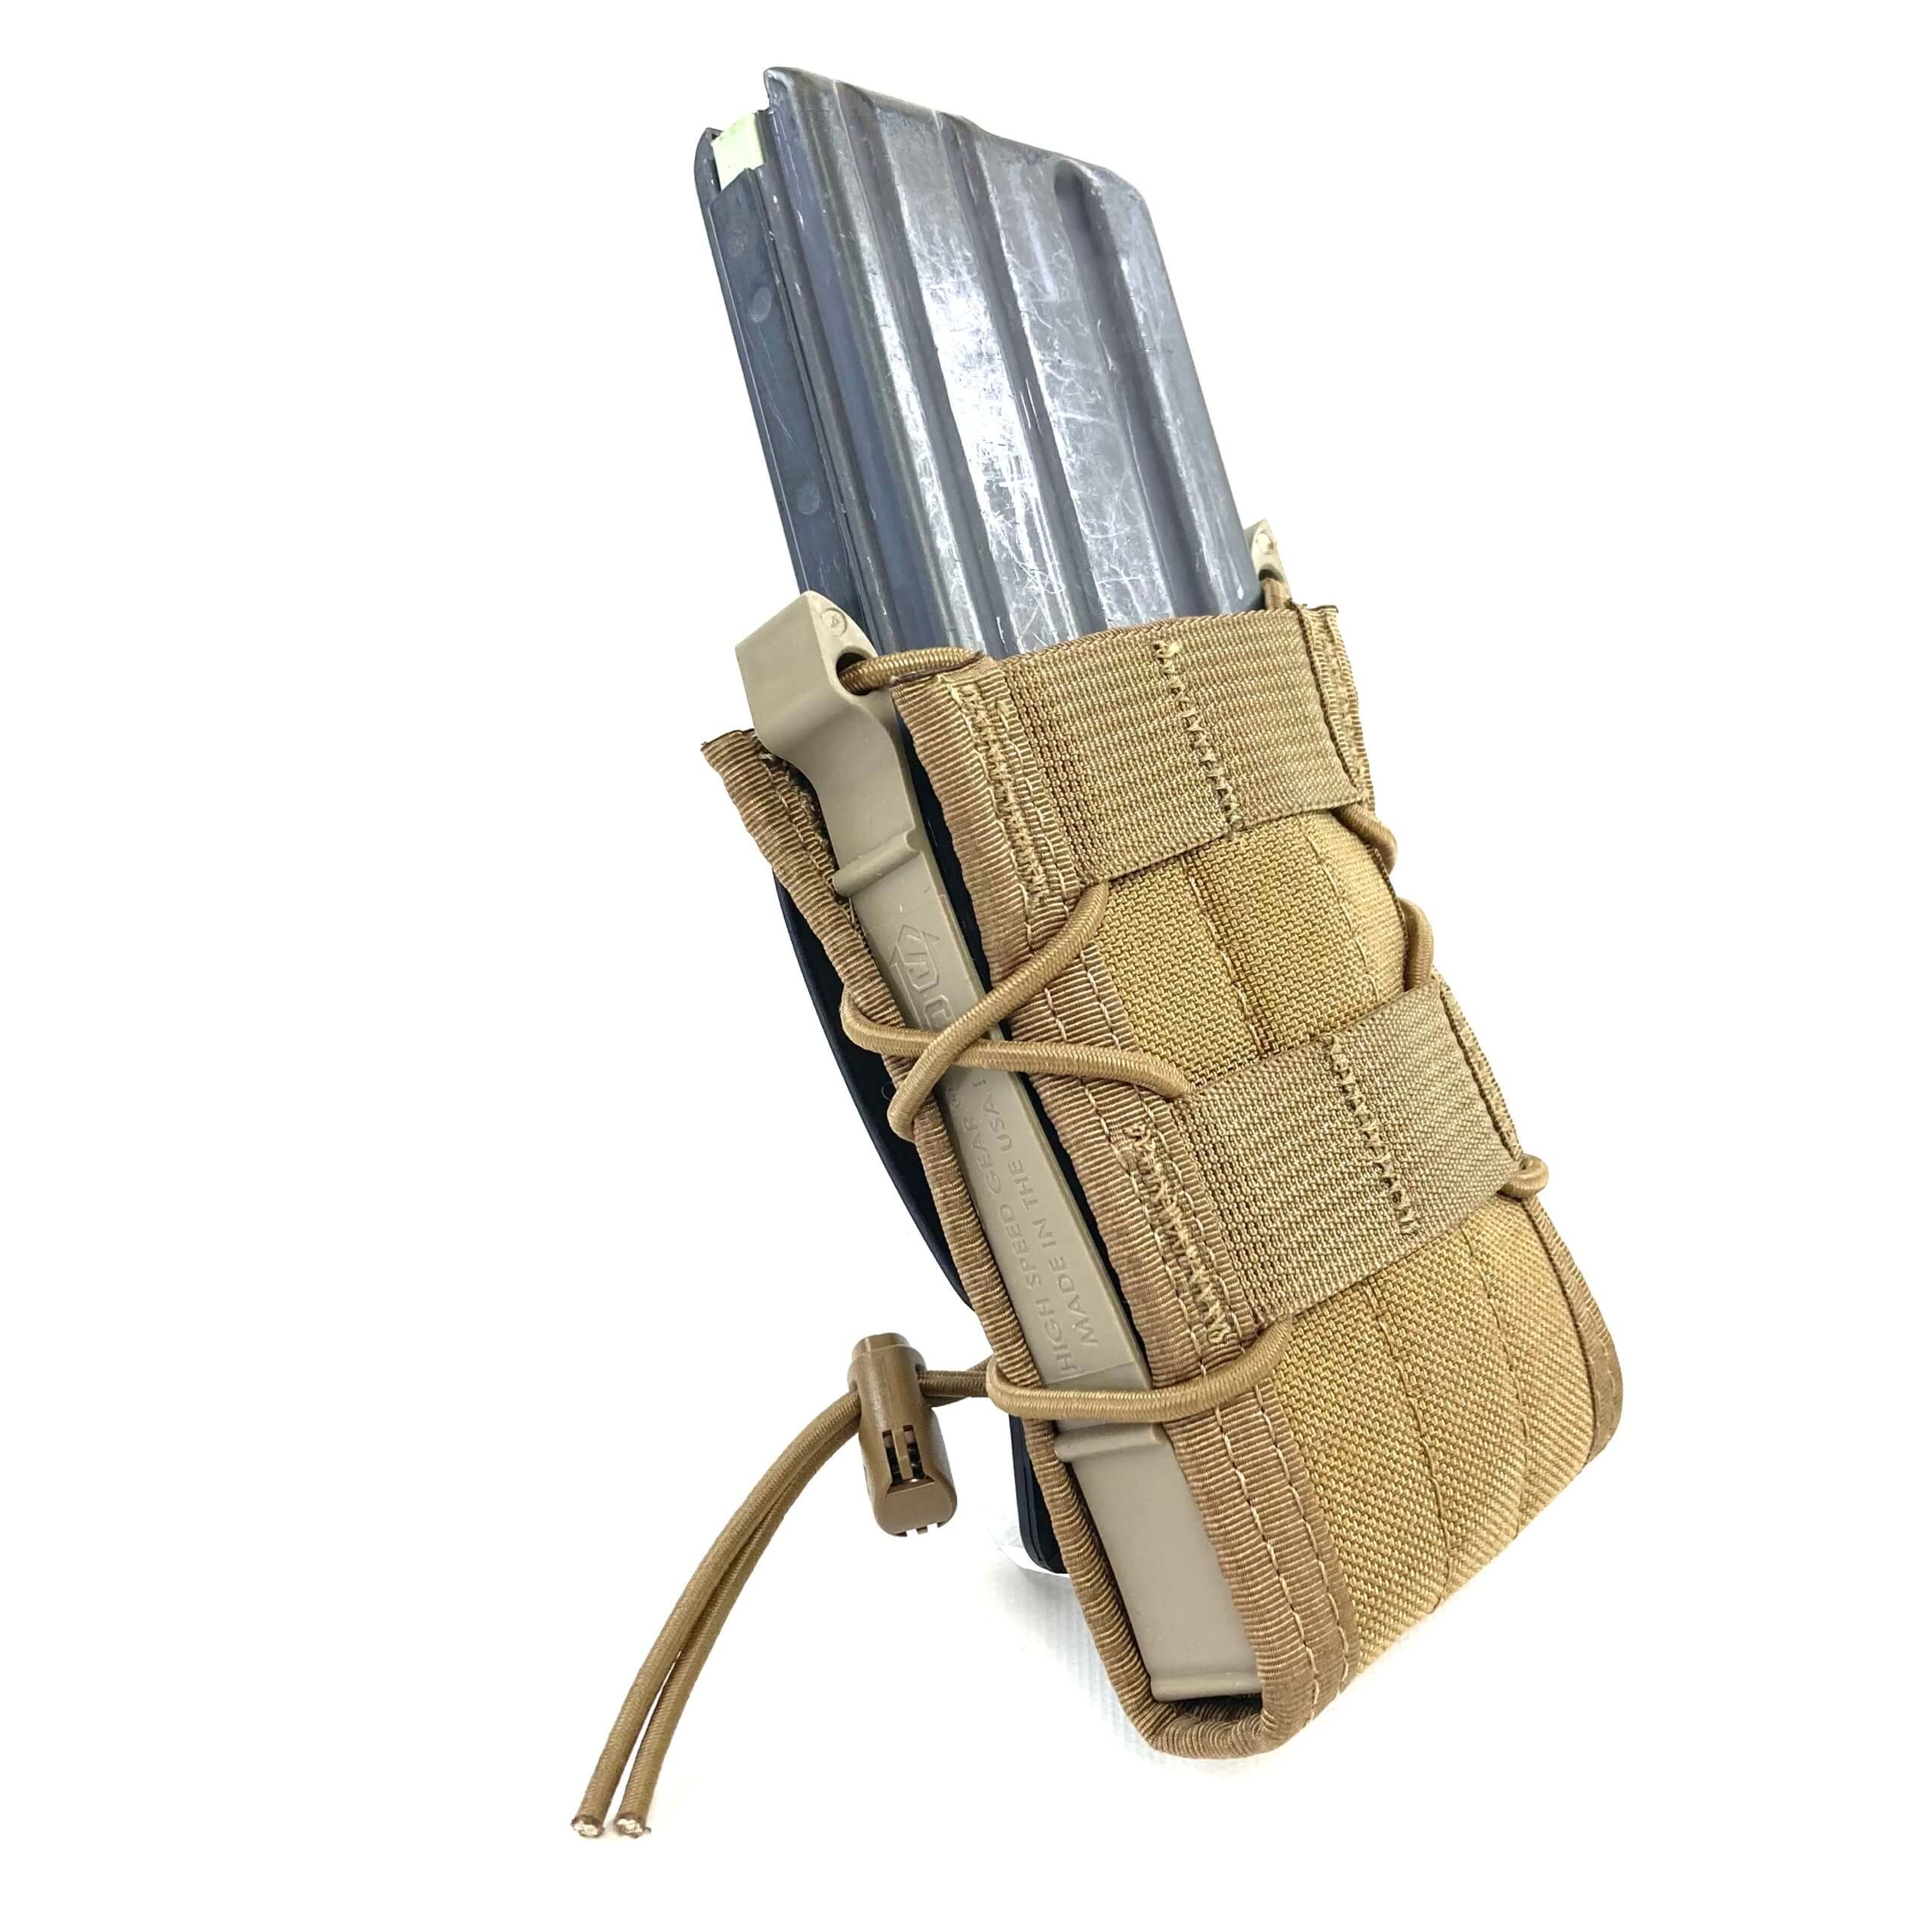 New-HSGI-TACO-LT-Pouch-MOLLE-Overall-scaled.jpg